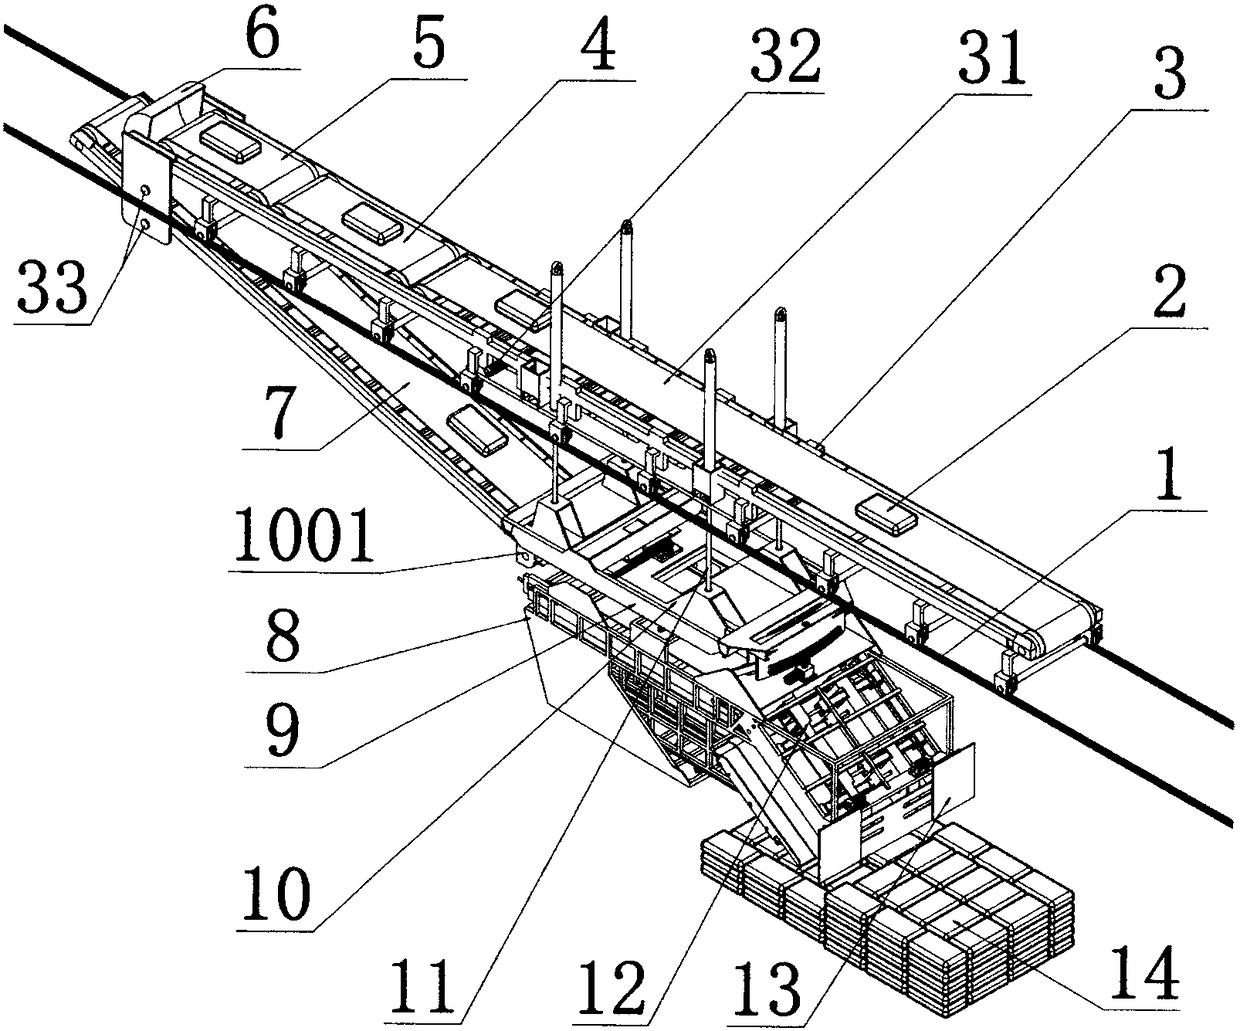 Continuous automatic truck loading and stacking system for material packages